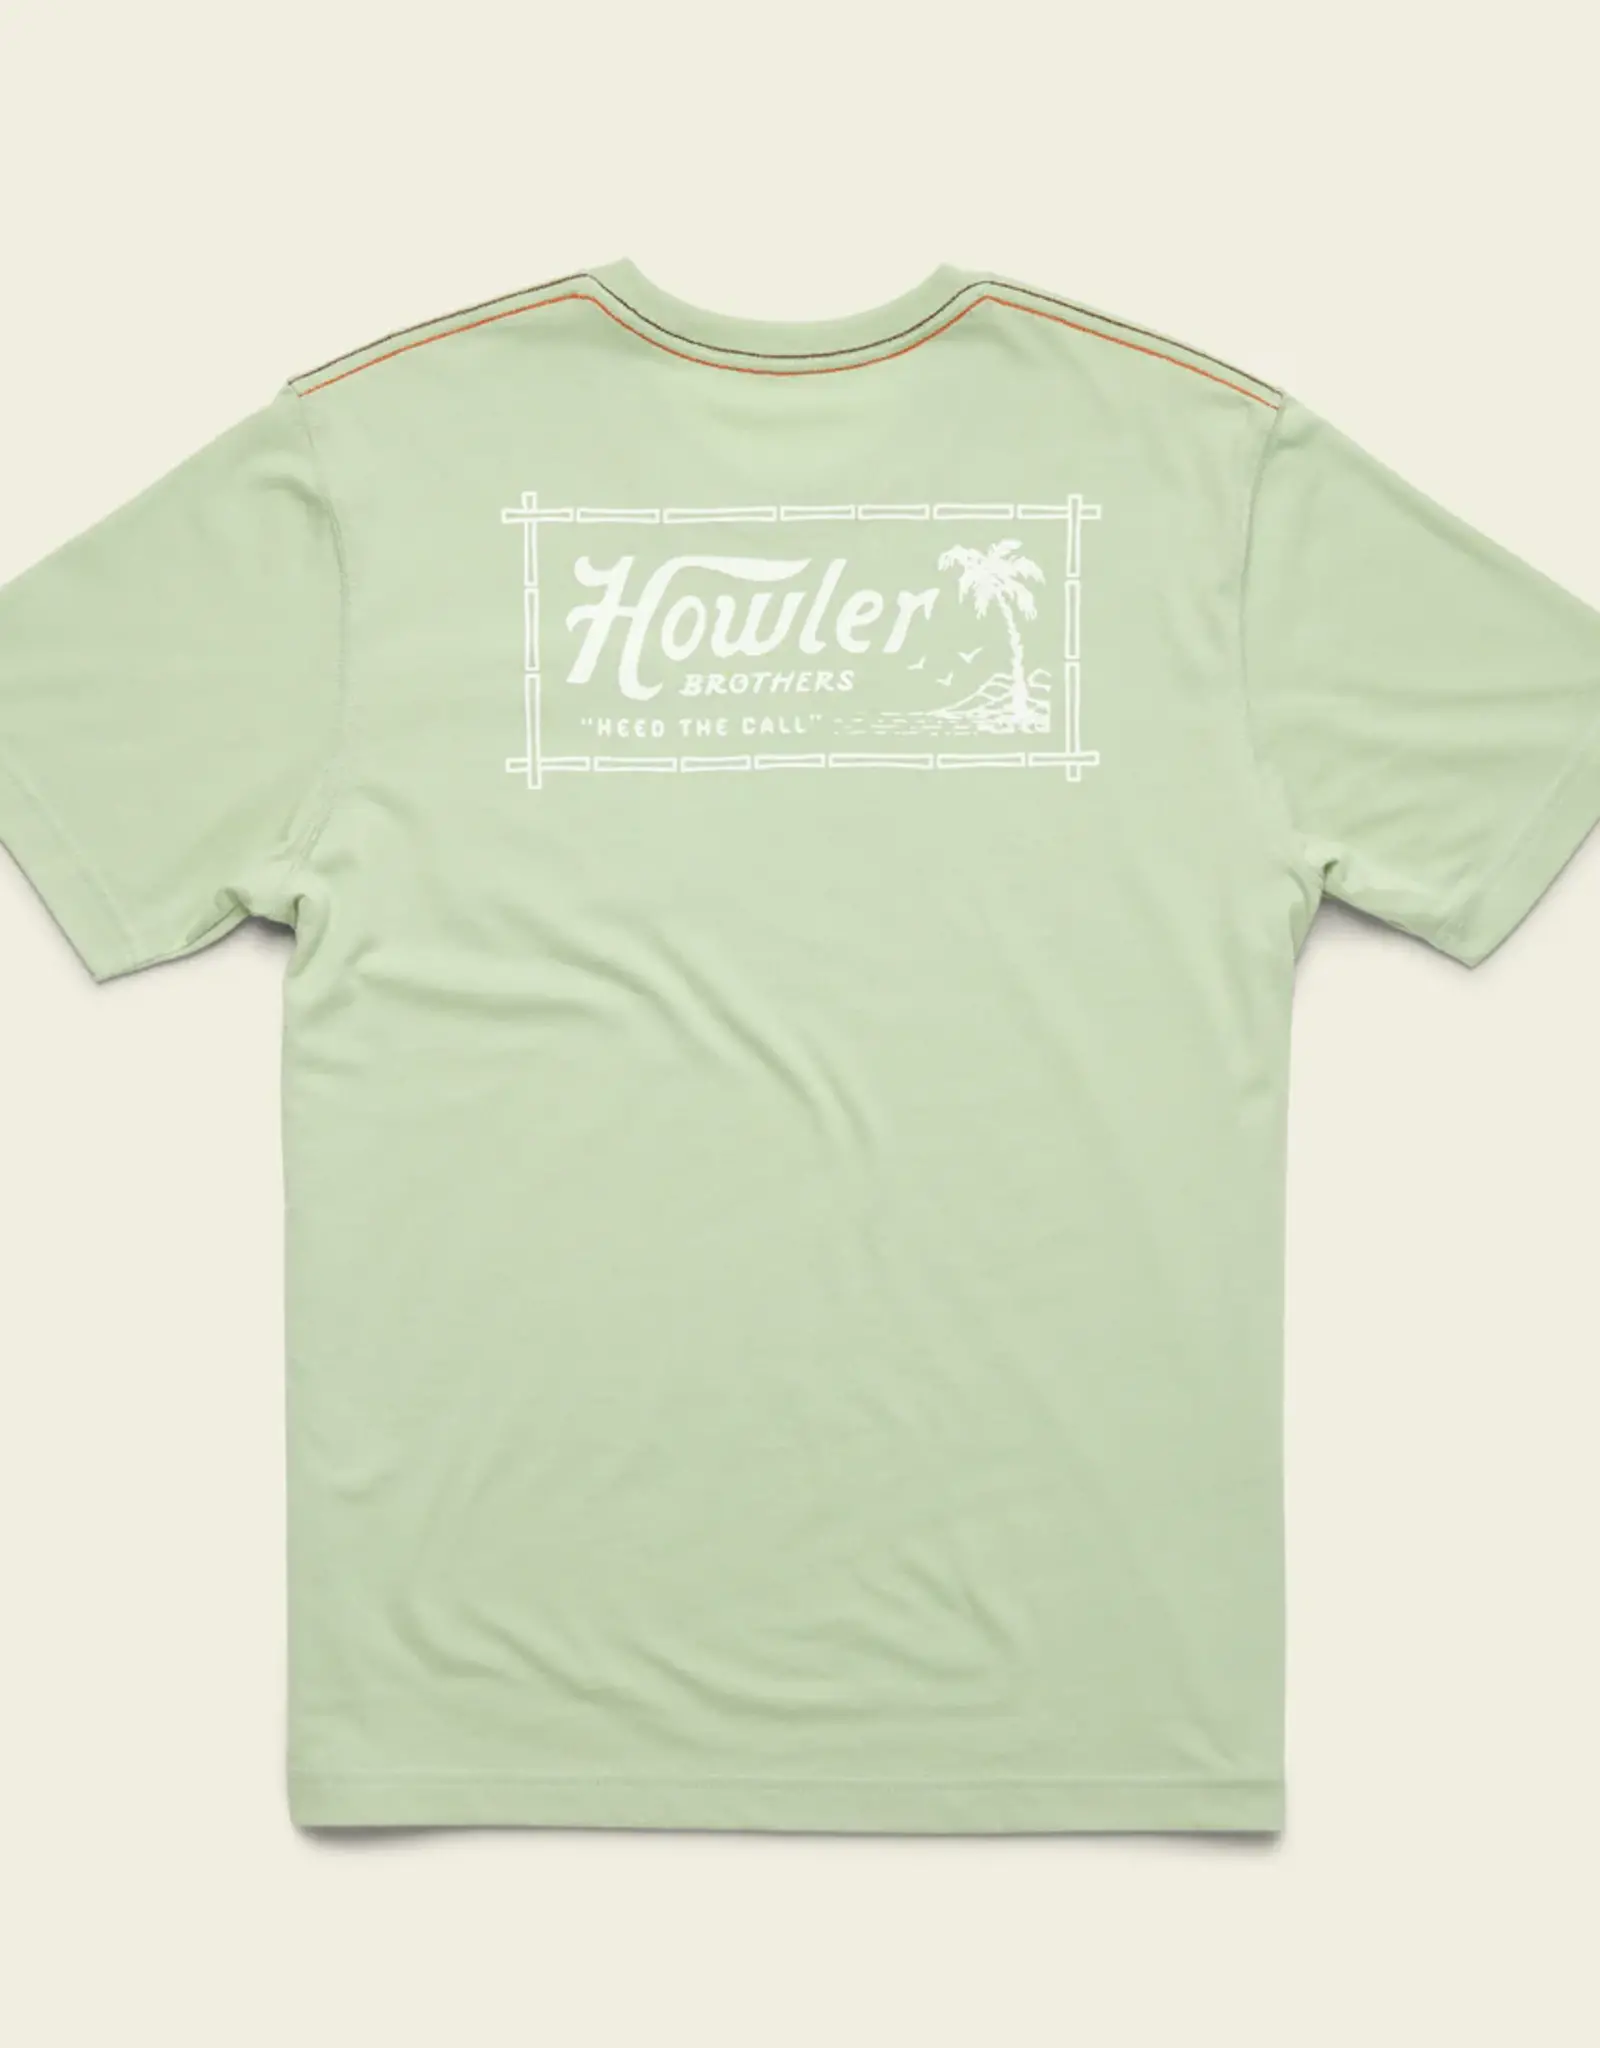 Howler Brothers Tropic of Howler Tee